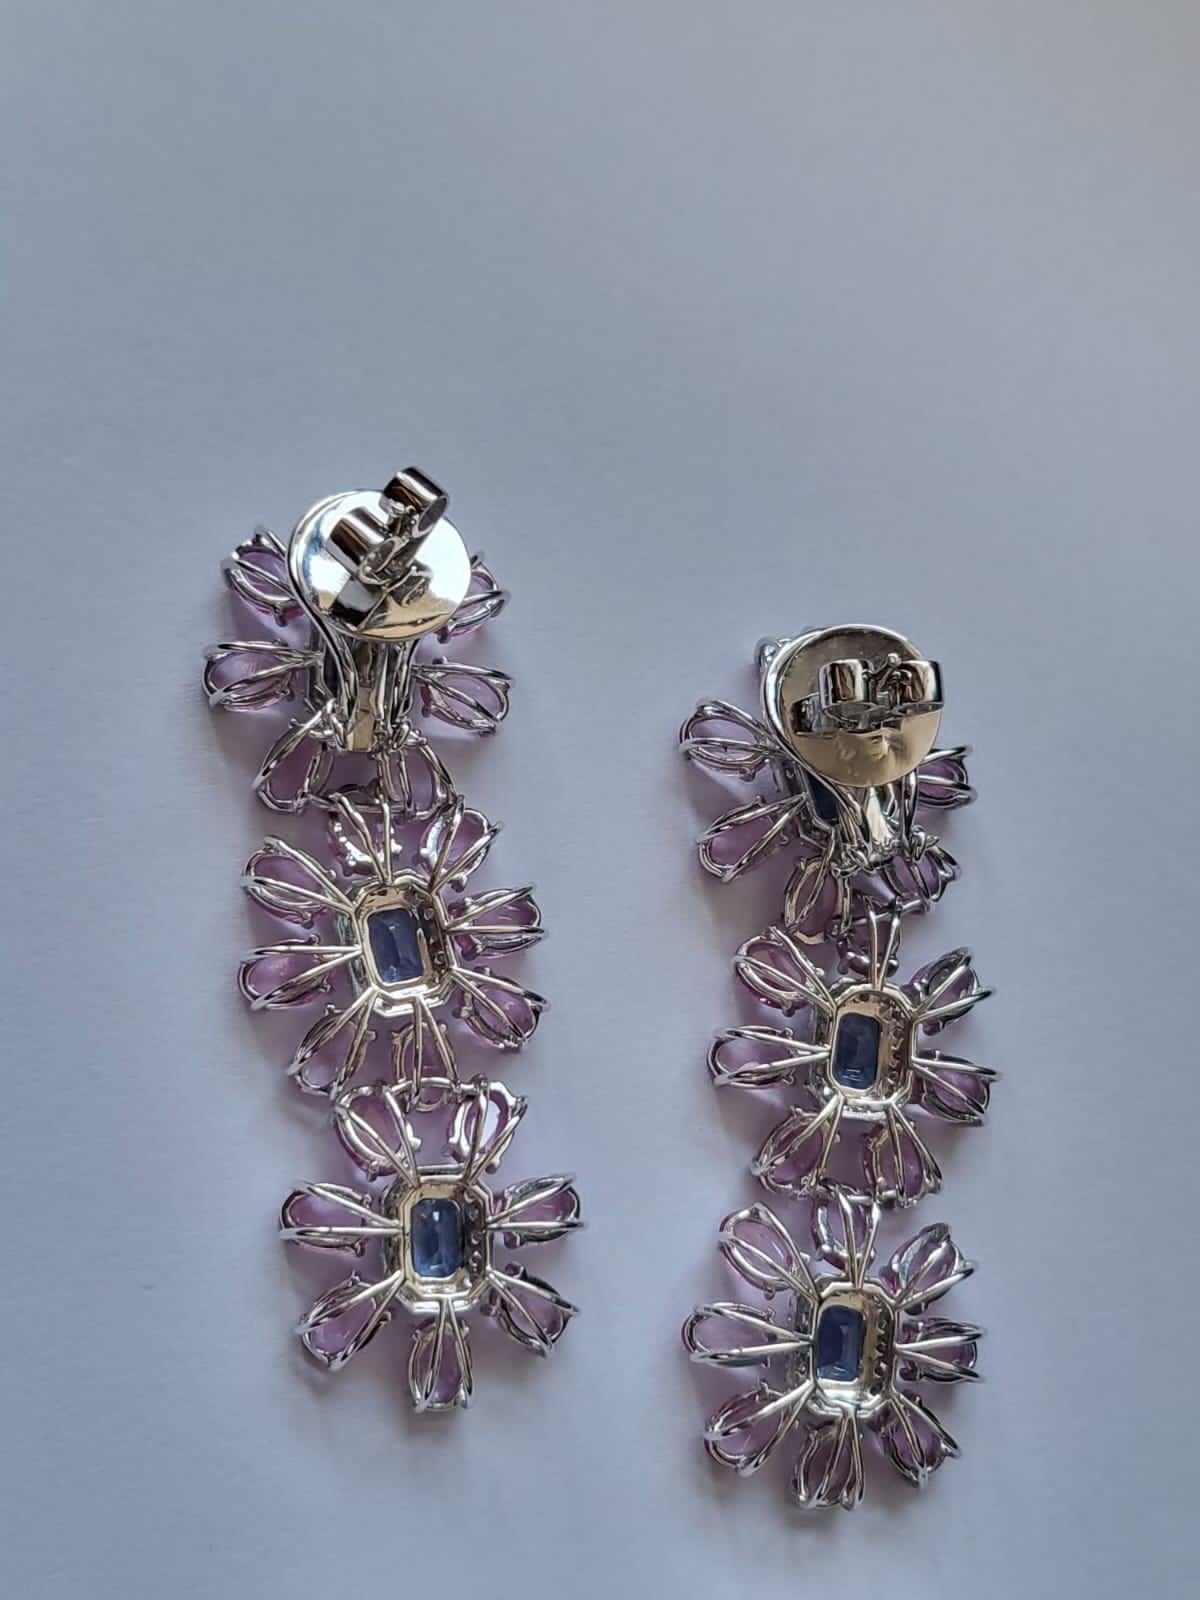 A very gorgeous and one of a kind, Blue Sapphire & Pink Sapphire Chandelier Earrings set in 18K White Gold & Diamonds. The weight of the Blue Sapphires is 4.36 carats. The Blue Sapphire is of Ceylon (Sri Lanka) origin. The weight of the Pink